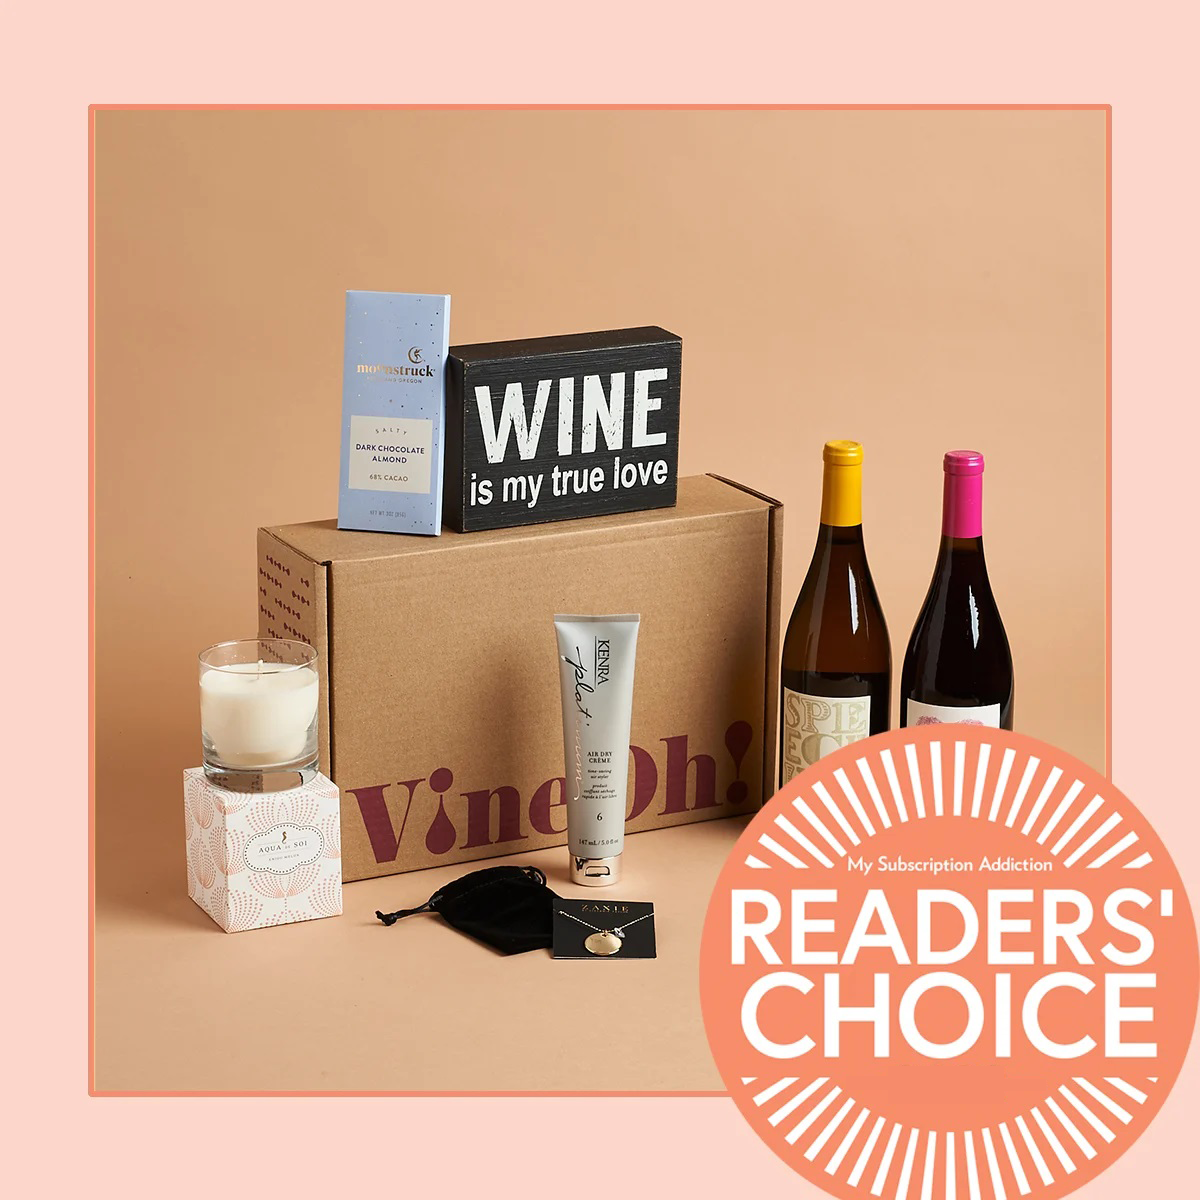 The 15 Best Wine Subscription Boxes in 2023 – Readers’ Choice Awards